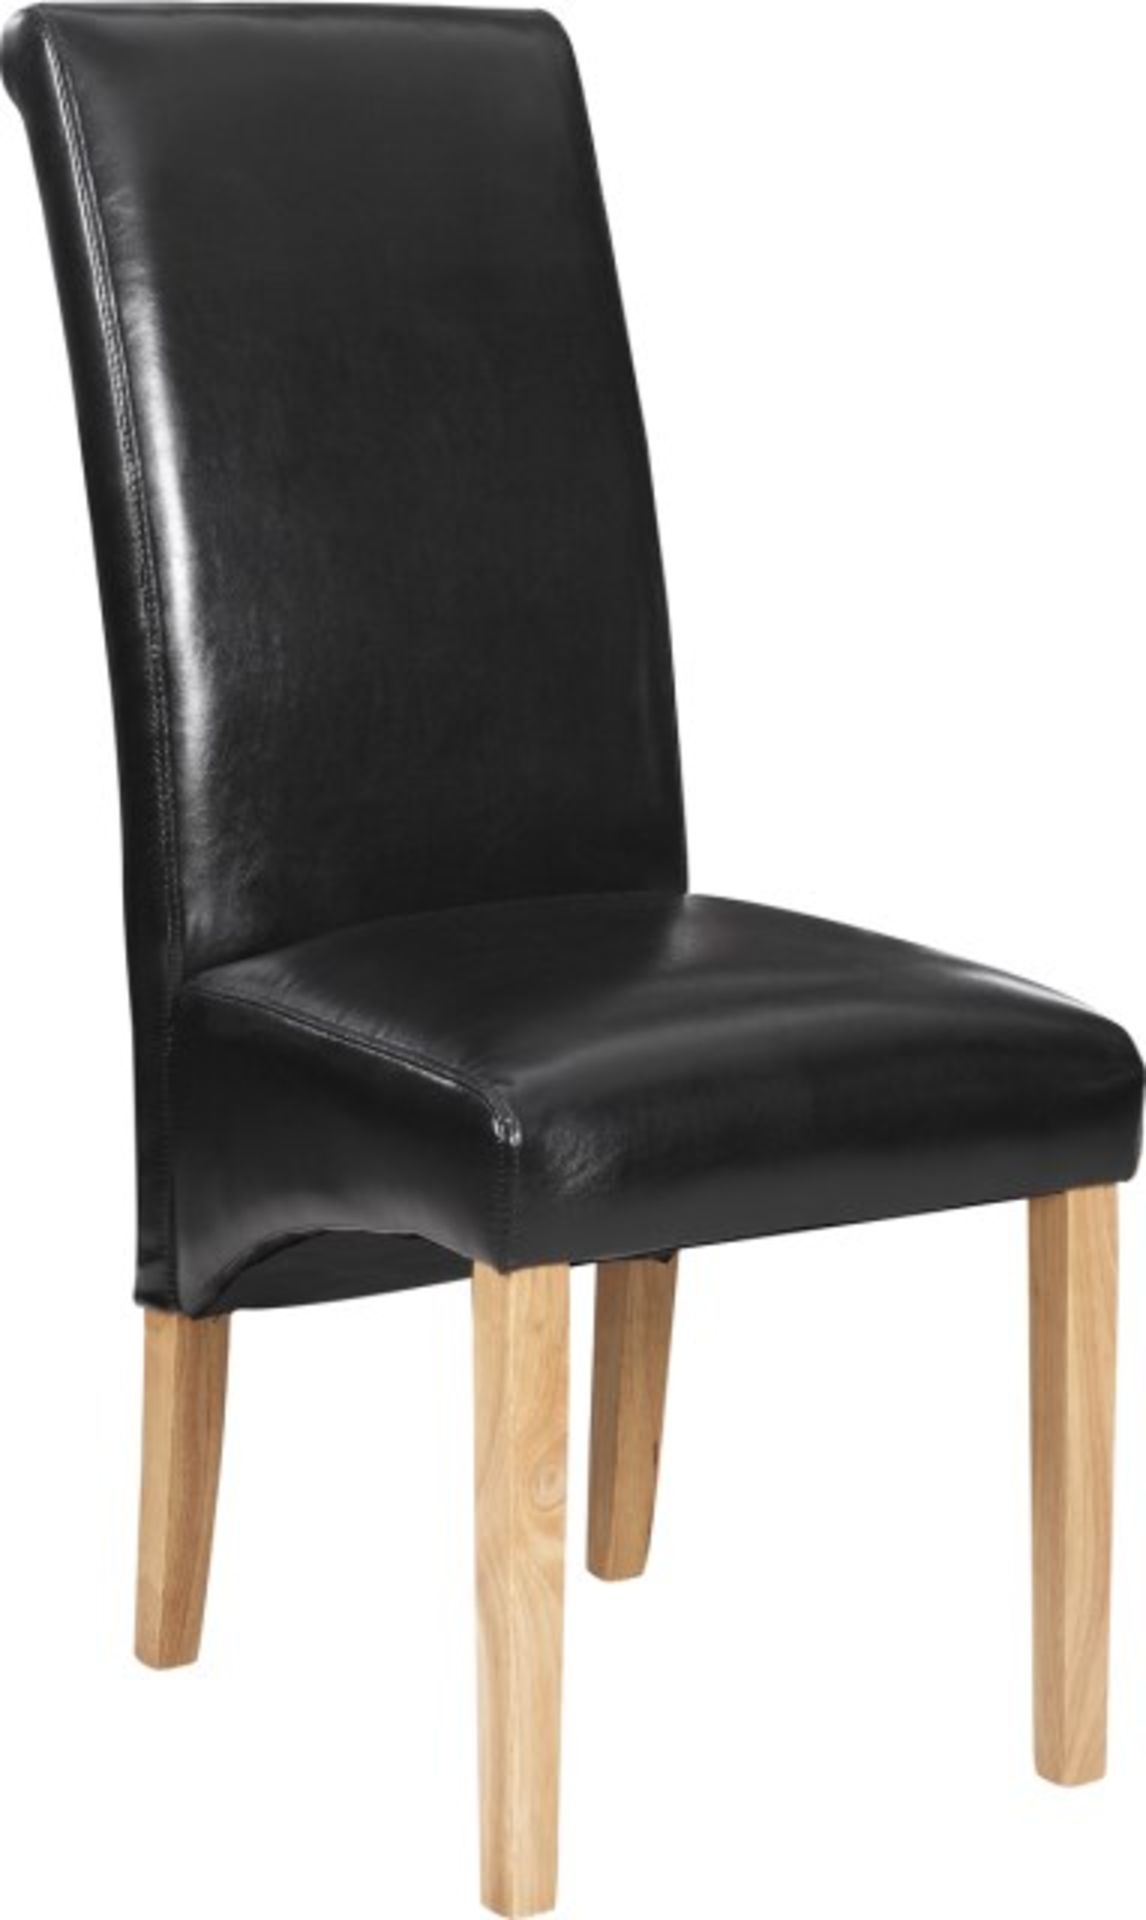 V Grade A Black PU Leather Dining Chair X 2 YOUR BID PRICE TO BE MULTIPLIED BY TWO - Image 2 of 2